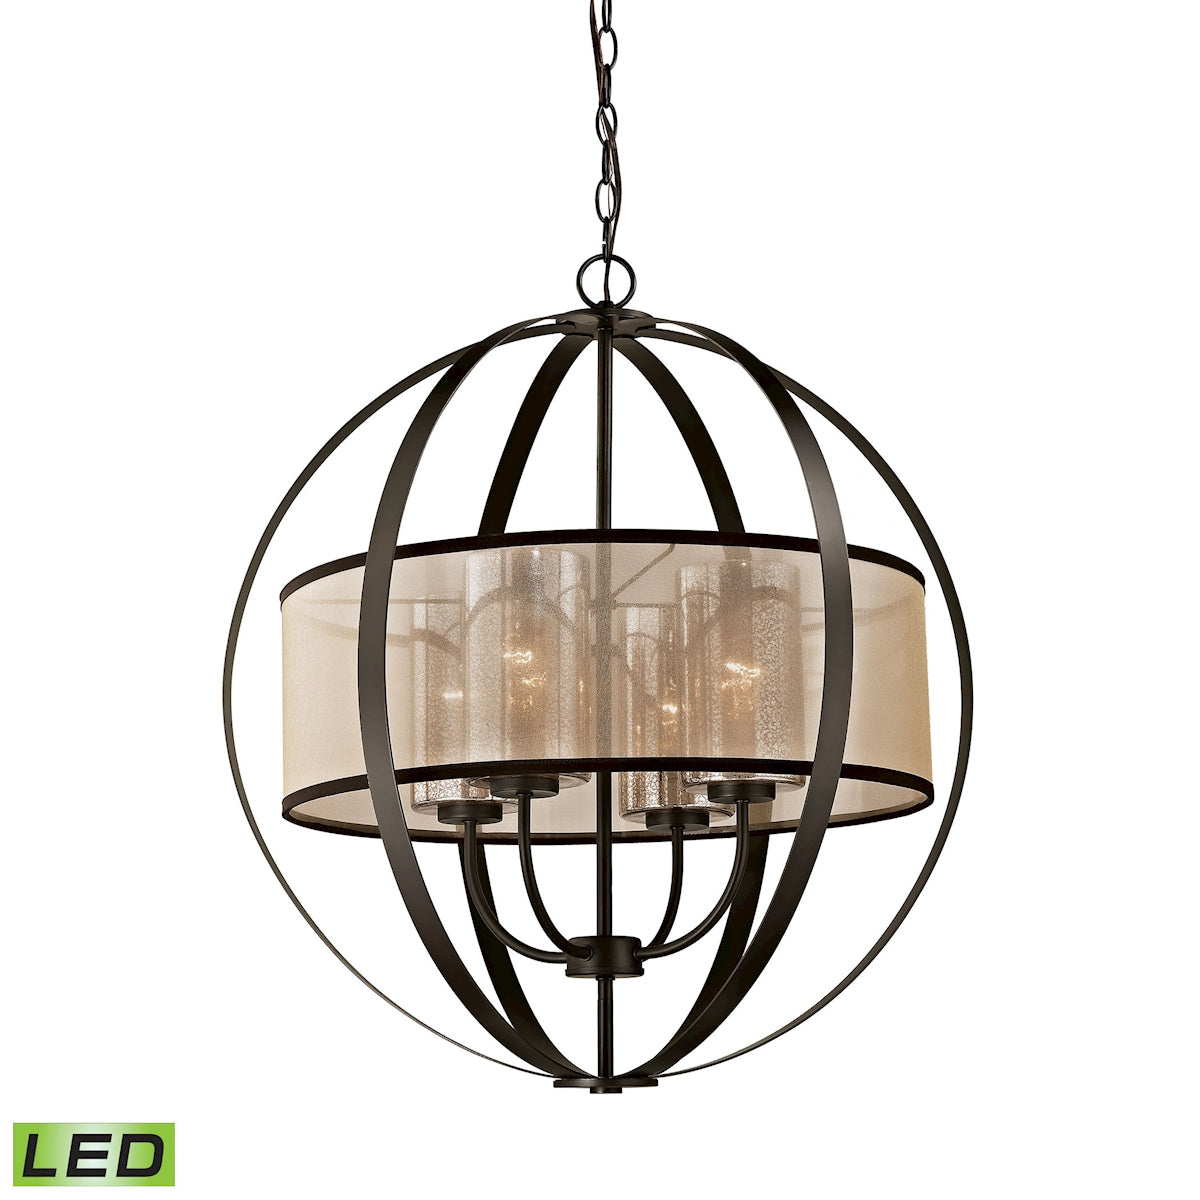 ELK Lighting 57029/4-LED Diffusion 4-Light Chandelier in Oiled Bronze with Organza and Mercury Glass - Includes LED Bulbs